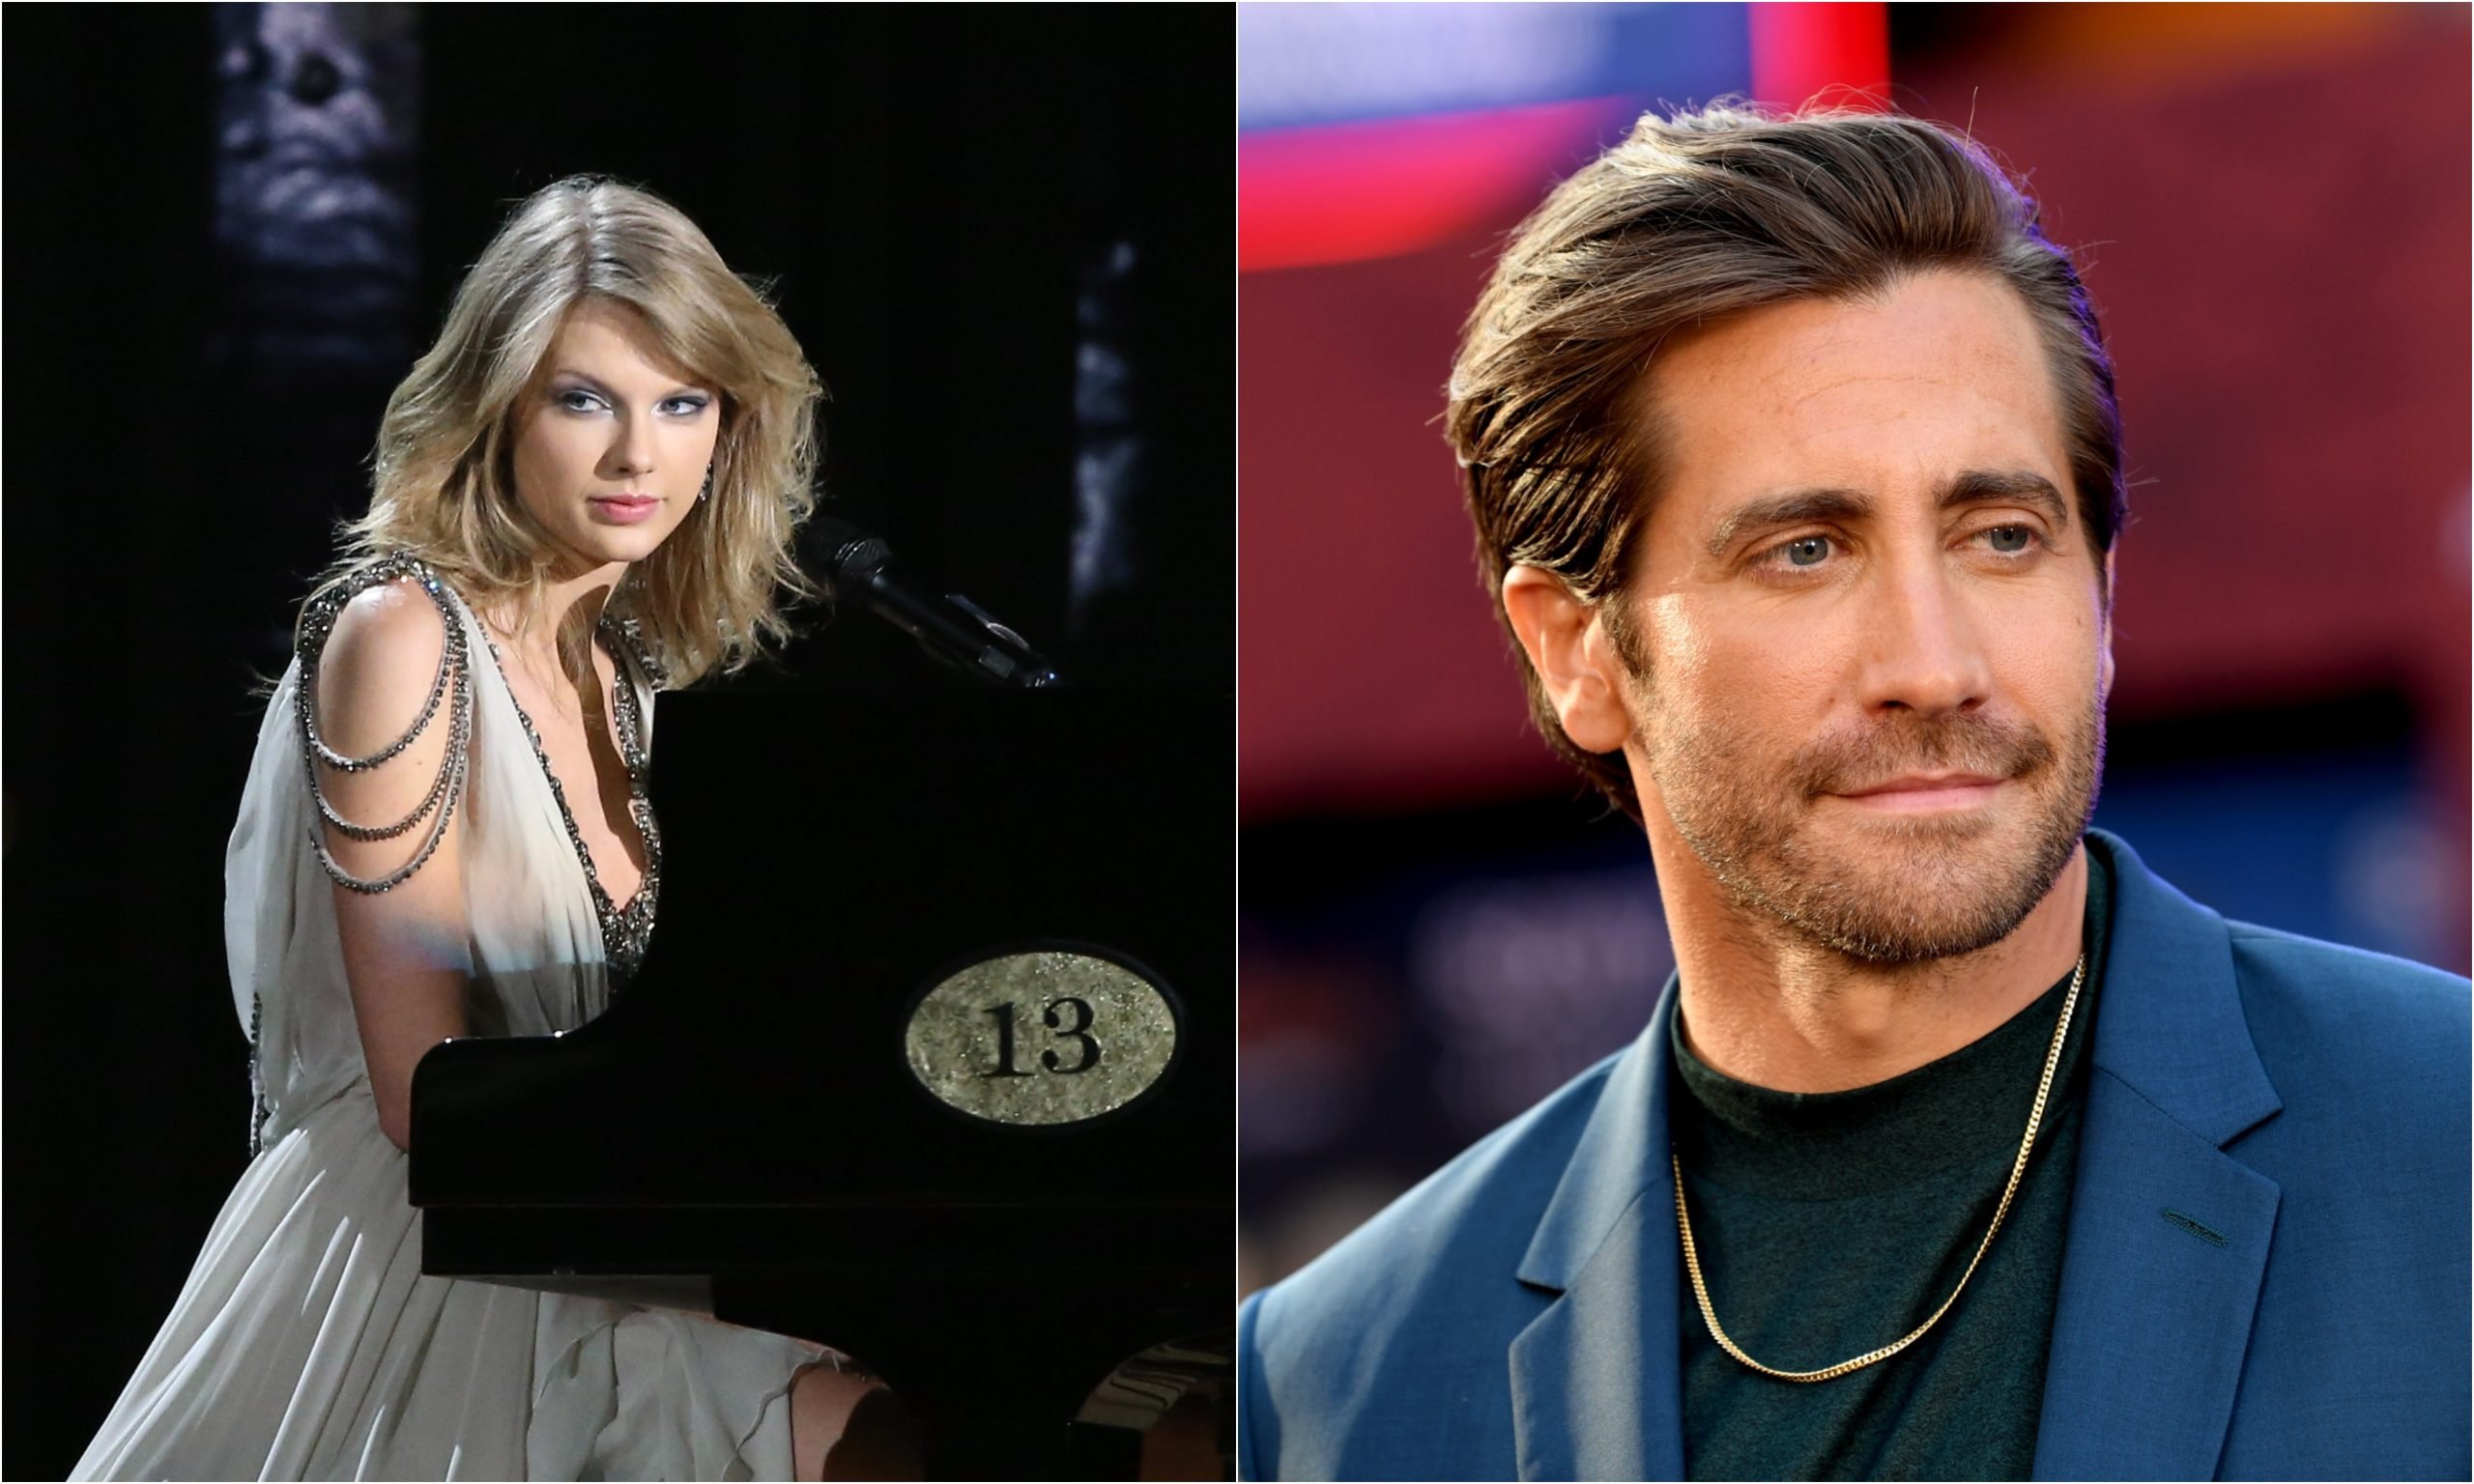 Taylor Swift Performed All Too Well At The Grammy Awards Was Jake Gyllenhaal In The